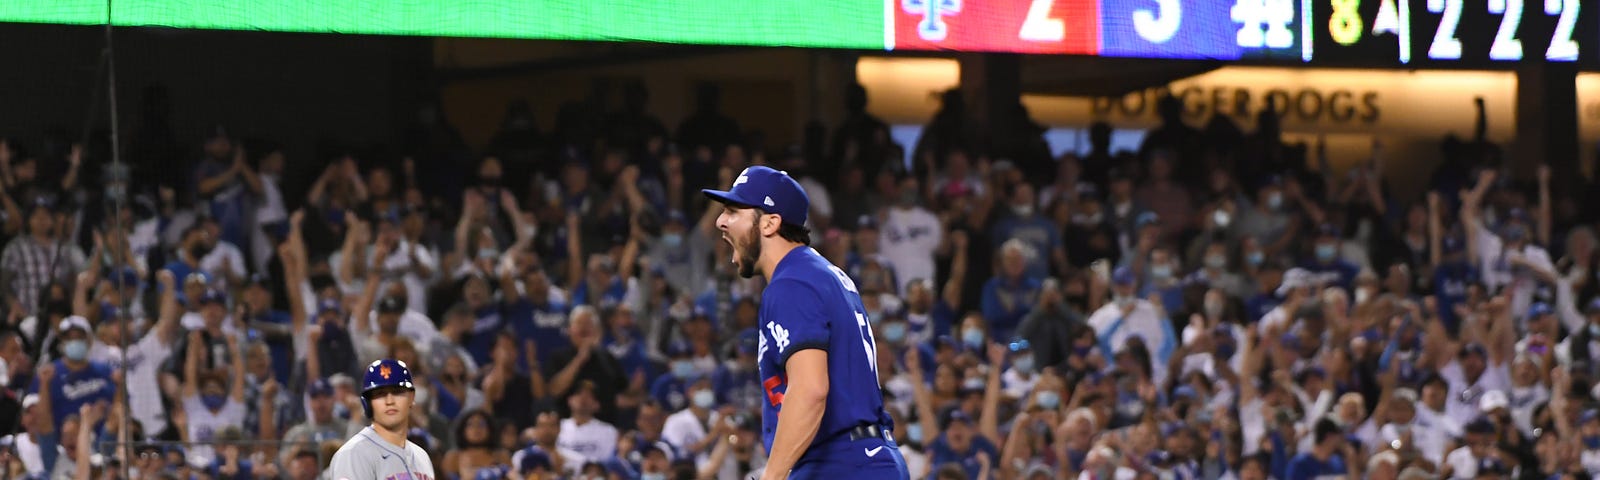 Fiery Buehler and Vesia keep the Mets cool and the Dodgers hot, by Cary  Osborne